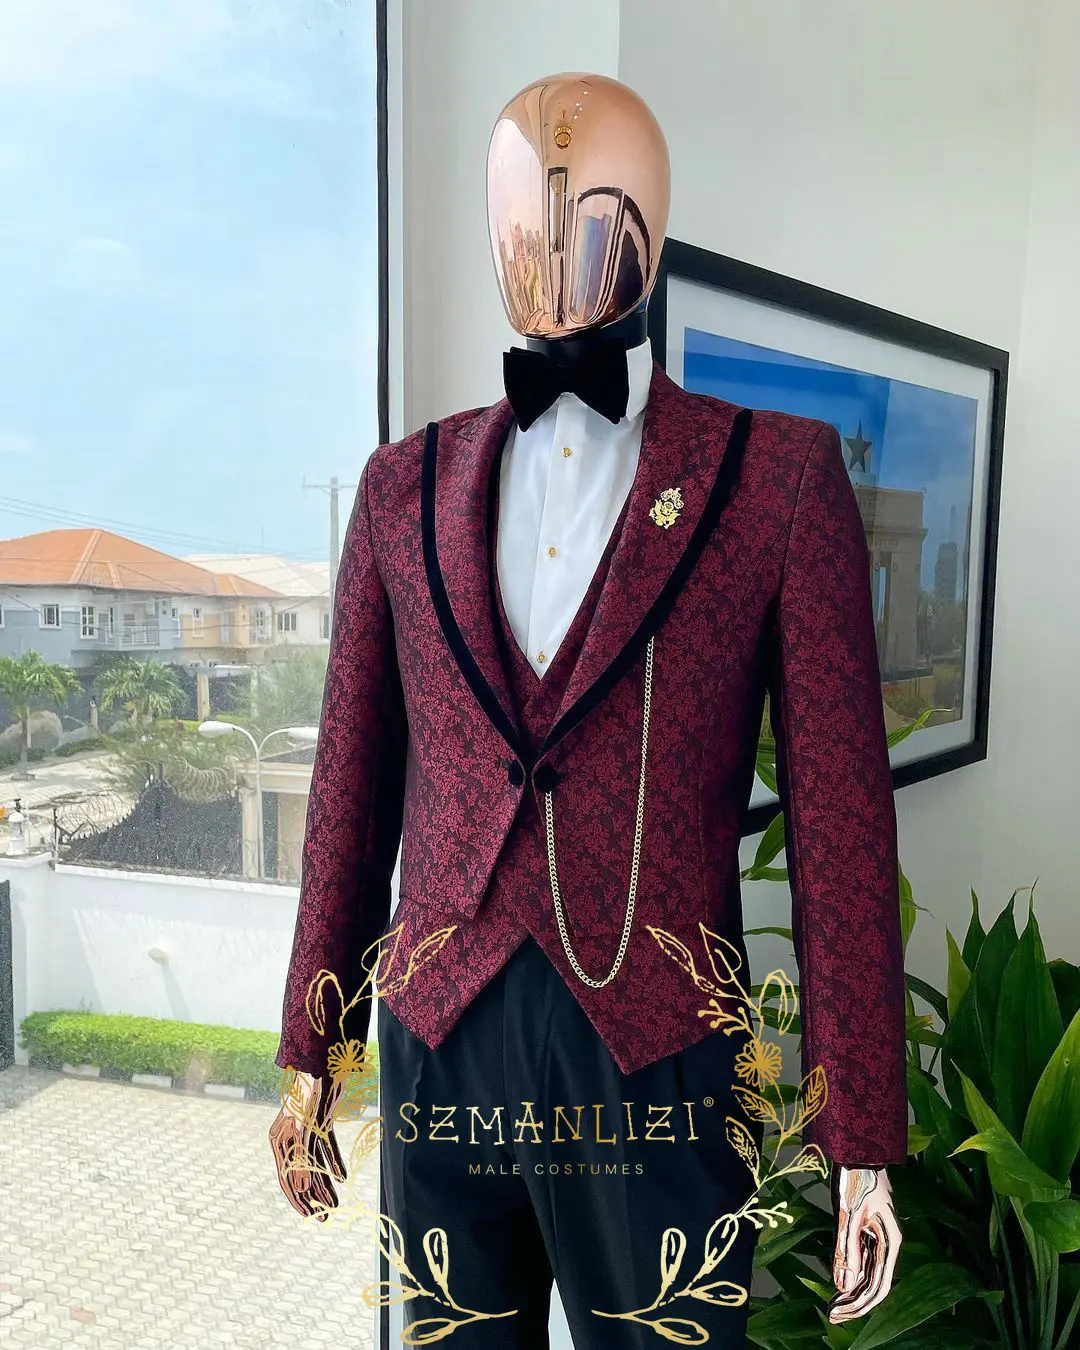 

Classic Formal Business Party Men Suits 3 Pieces Burgundy Jacquard Pattern Groom Tuxedos For Wedding Costume Blazer Vest Pant